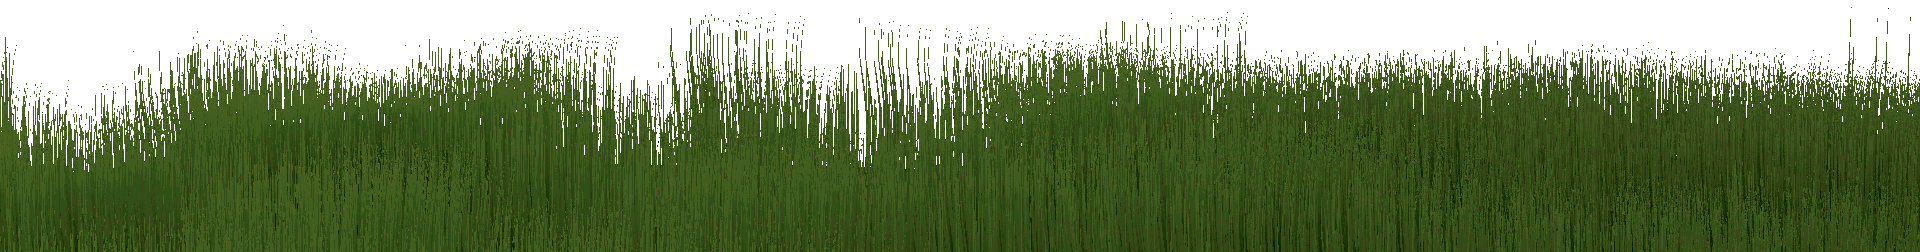 High res animated grass for fixed background (1920X1080) | OpenGameArt.org